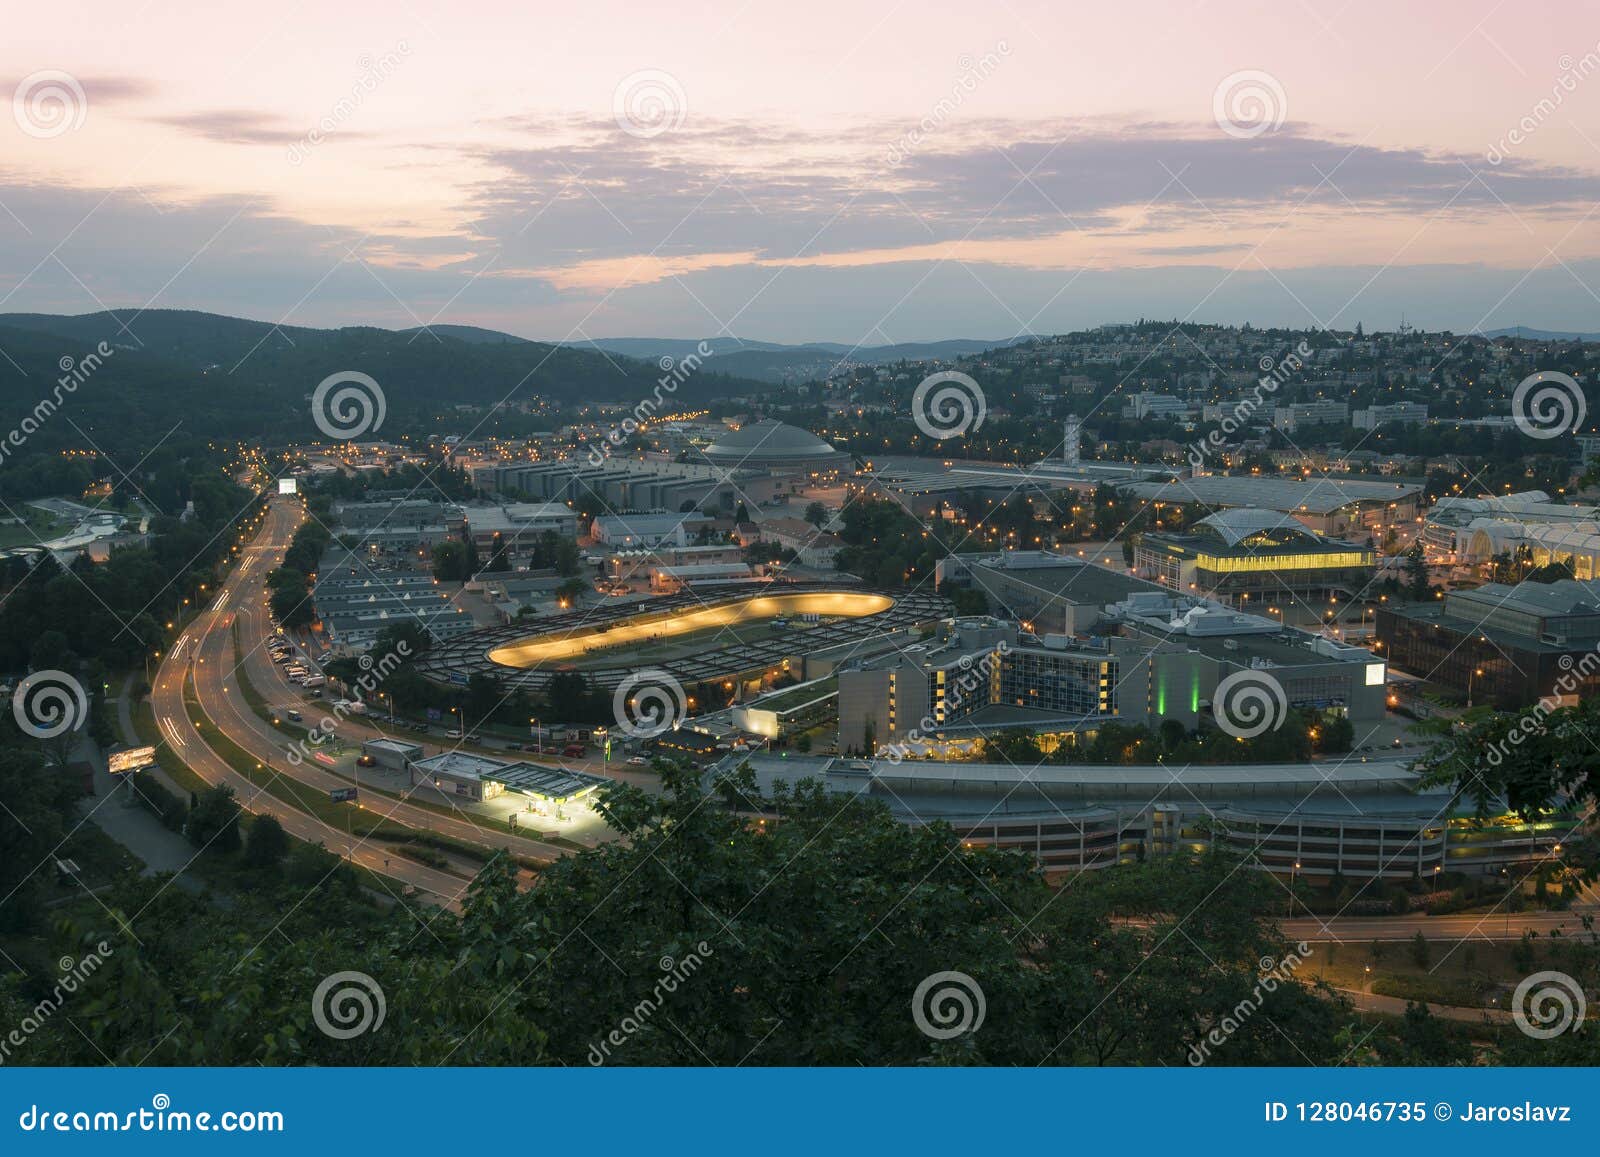 amazing top view on brno city, czech republic at summer evening. area around exhibition center, road, buildings, hotels, velodrome